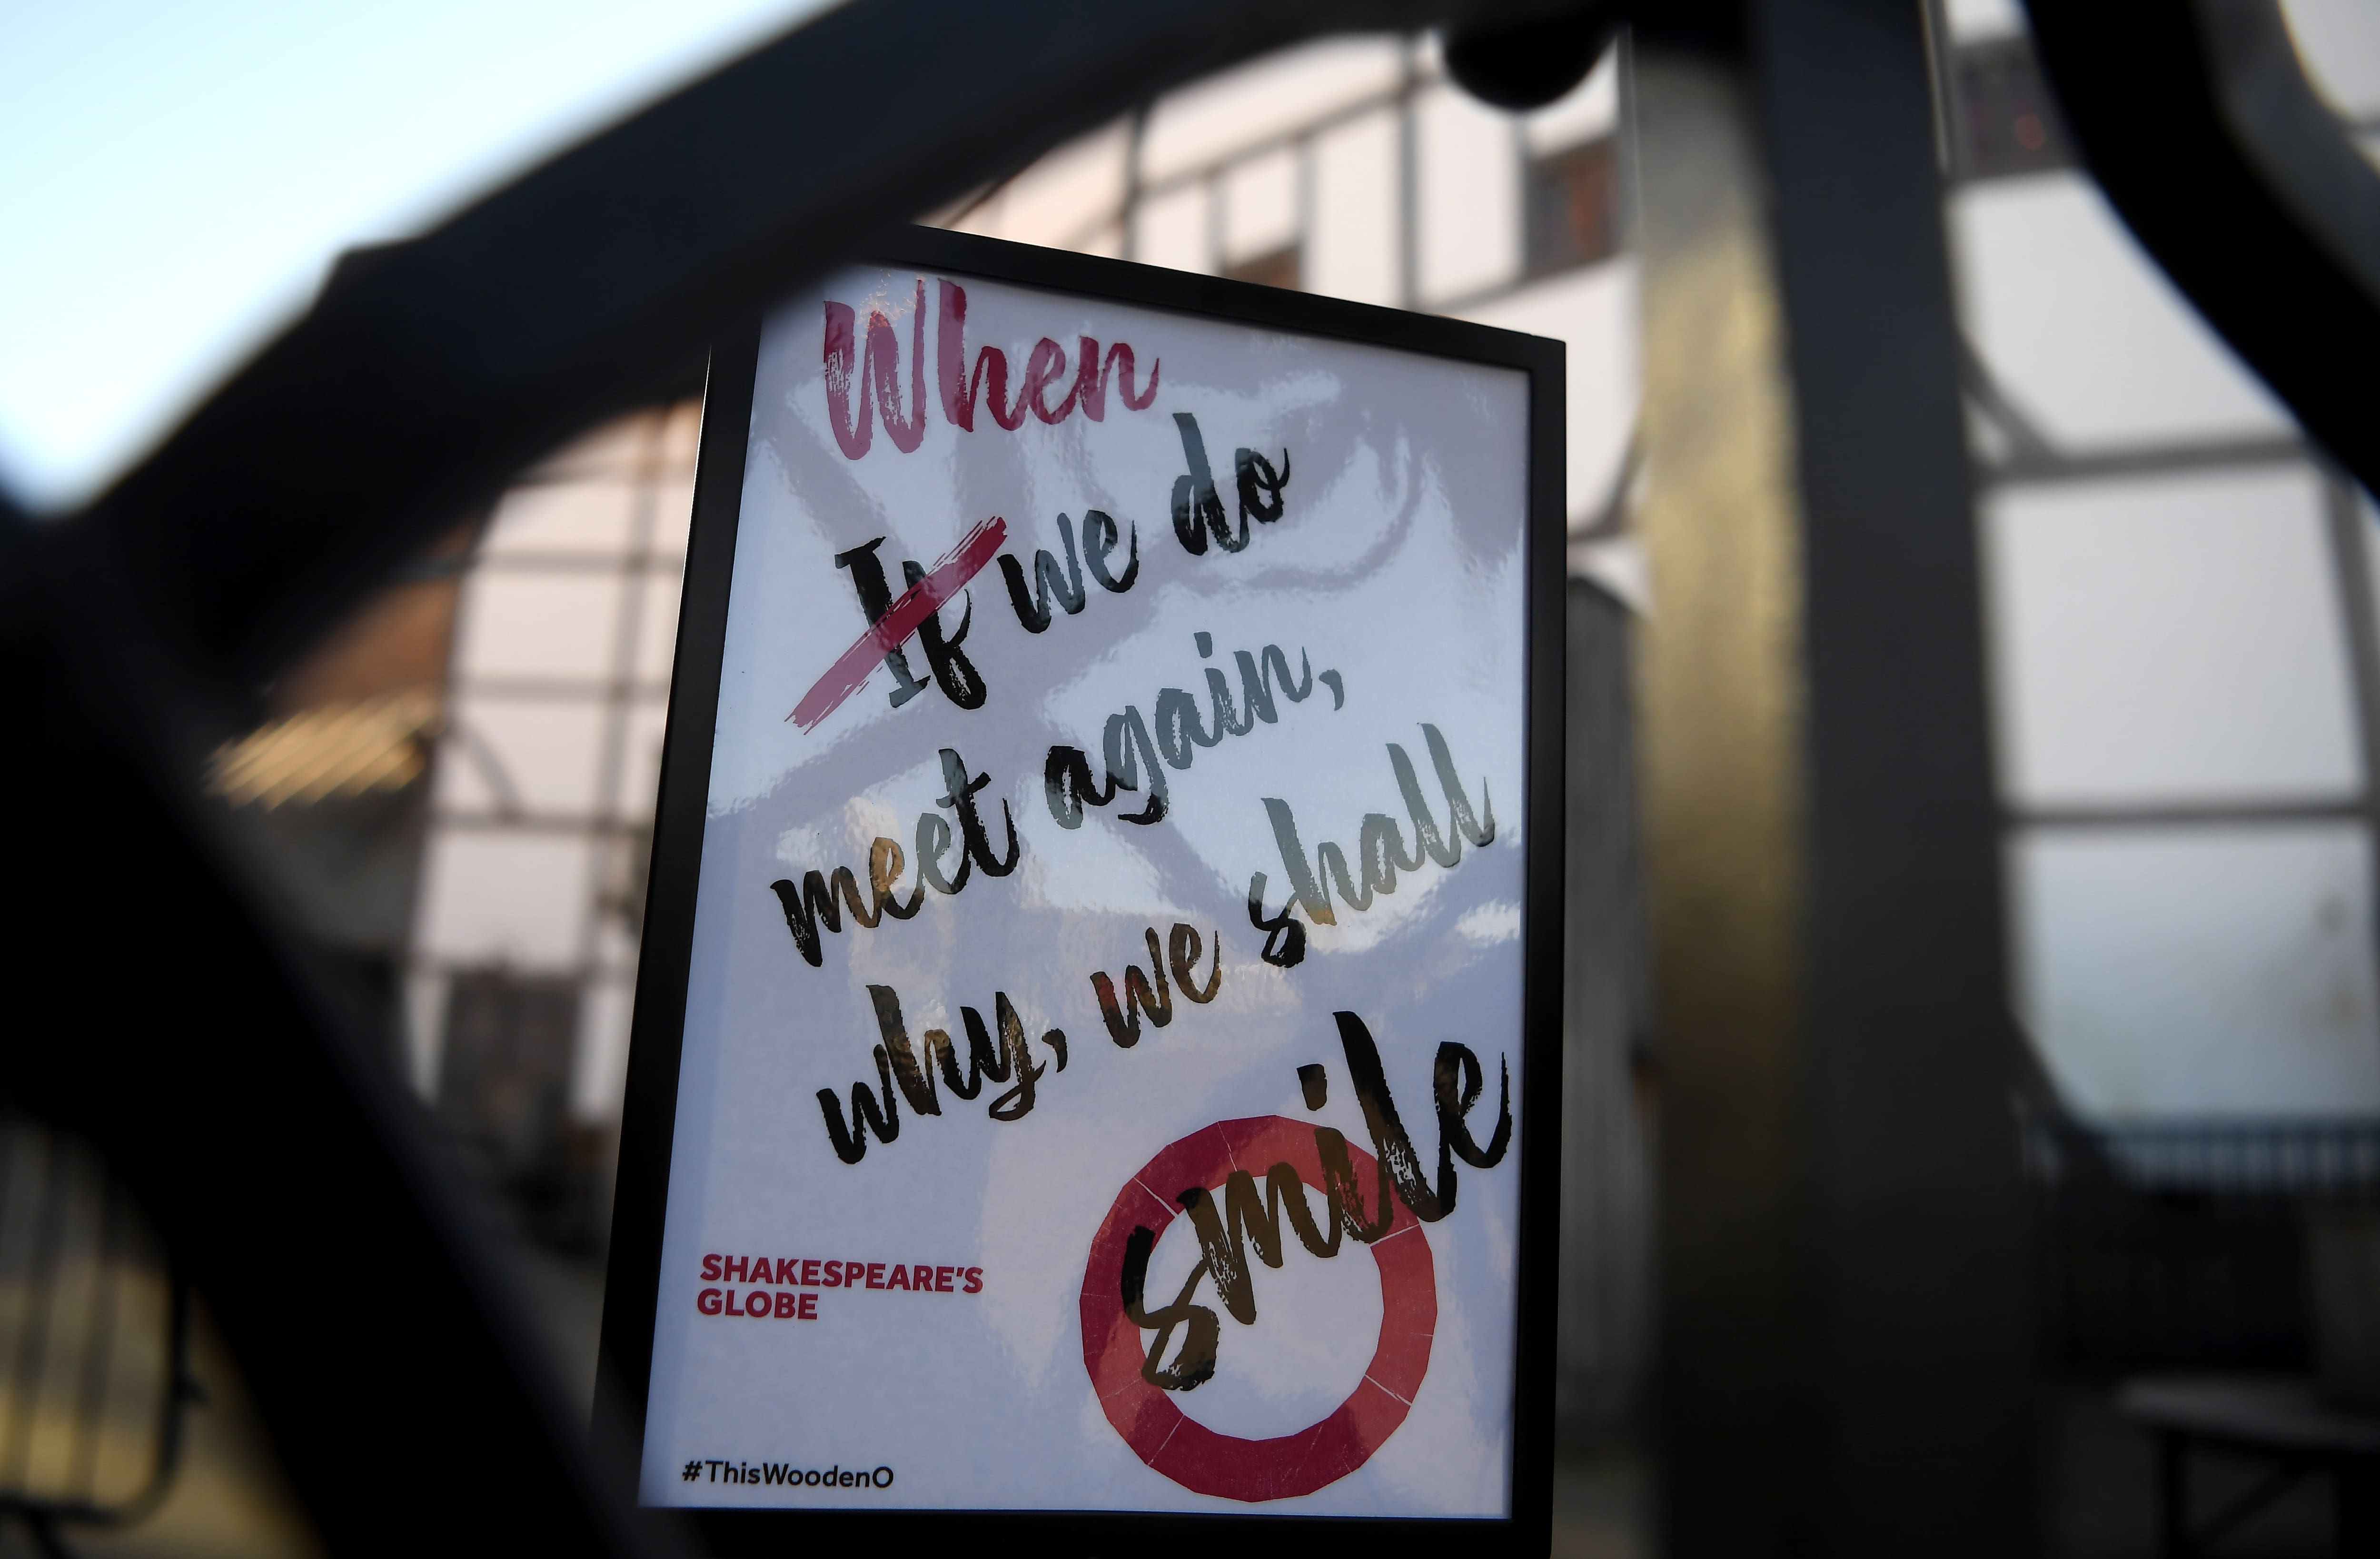 LONDON, ENGLAND - MARCH 22:  A sign is seen outside the Globe Theatre on March 22, 2020 in London, England. Coronavirus (COVID-19) has spread to at least 188 countries, claiming over 13,000 lives and infecting more than 300,000 people. There have now been 5,018 diagnosed cases in the UK and 233 deaths. (Photo by Alex Davidson/Getty Images)